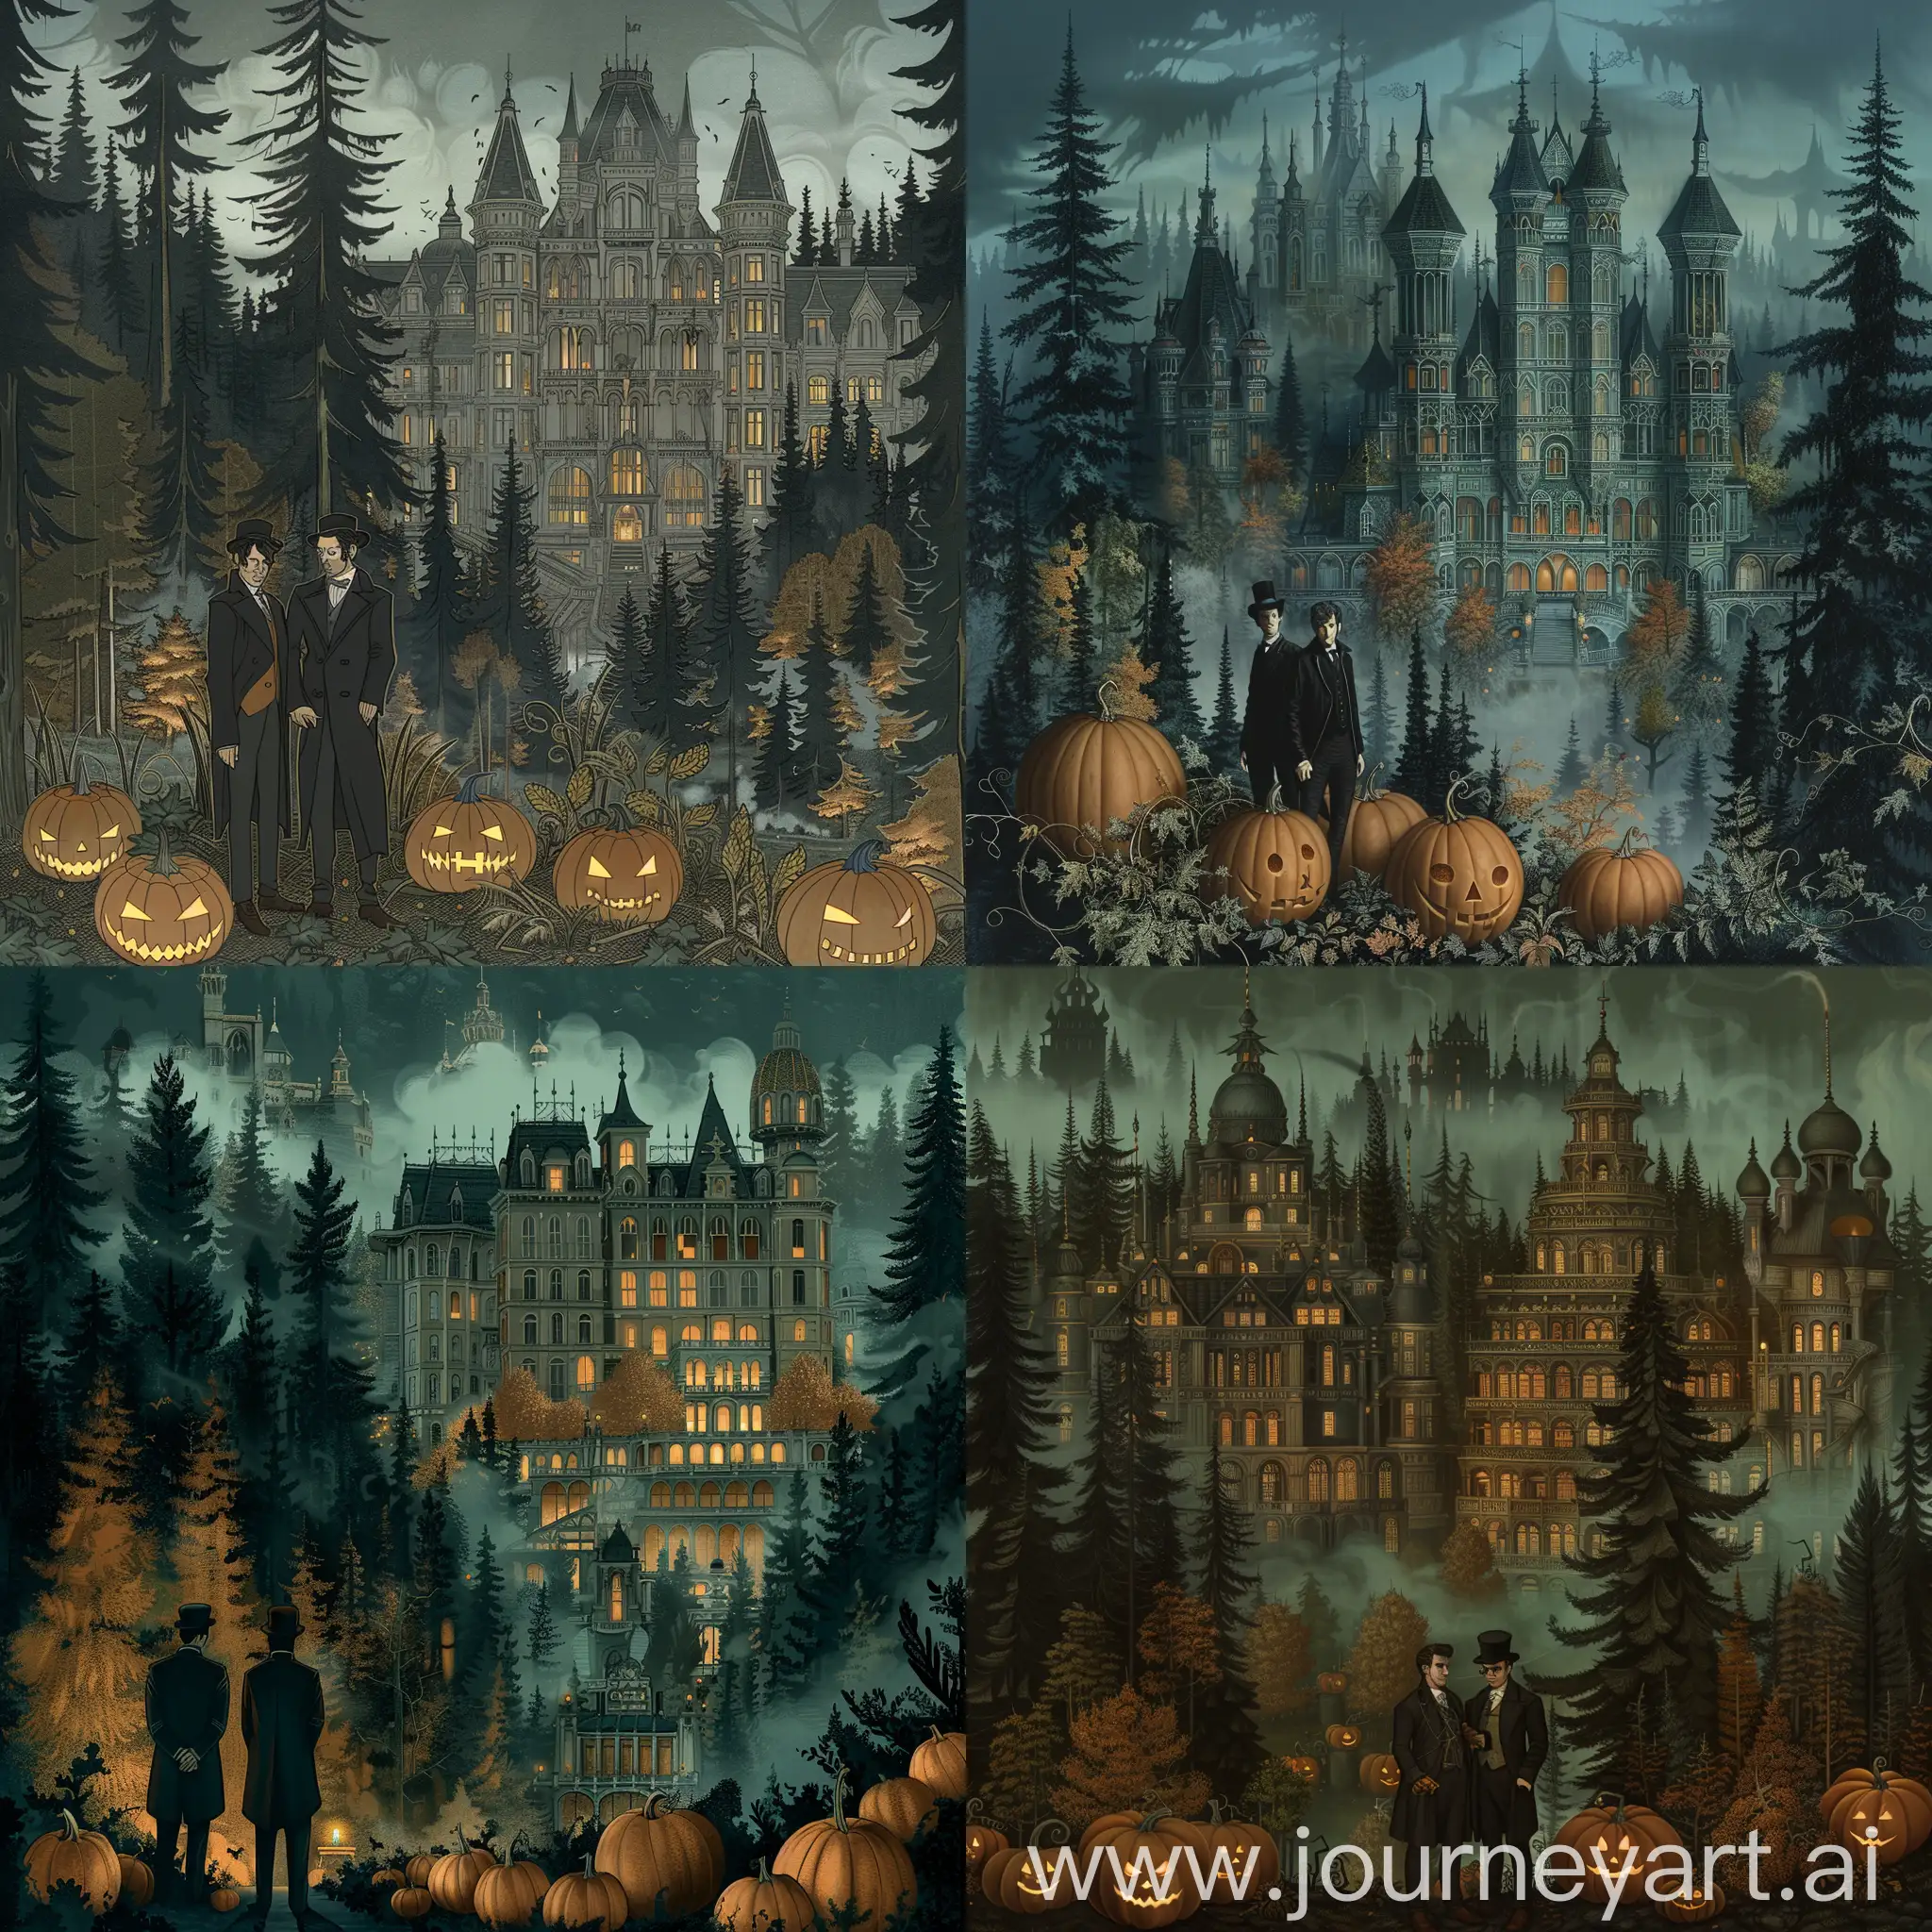 A Tim Burton-style drawing of a Belle Époque two male noir detectives standing next to a colossal Victorian palace with 1000 rooms, many towers and rooms in a shadowy foggy pine forest with baroque gardens and pumpkins on a dark night.